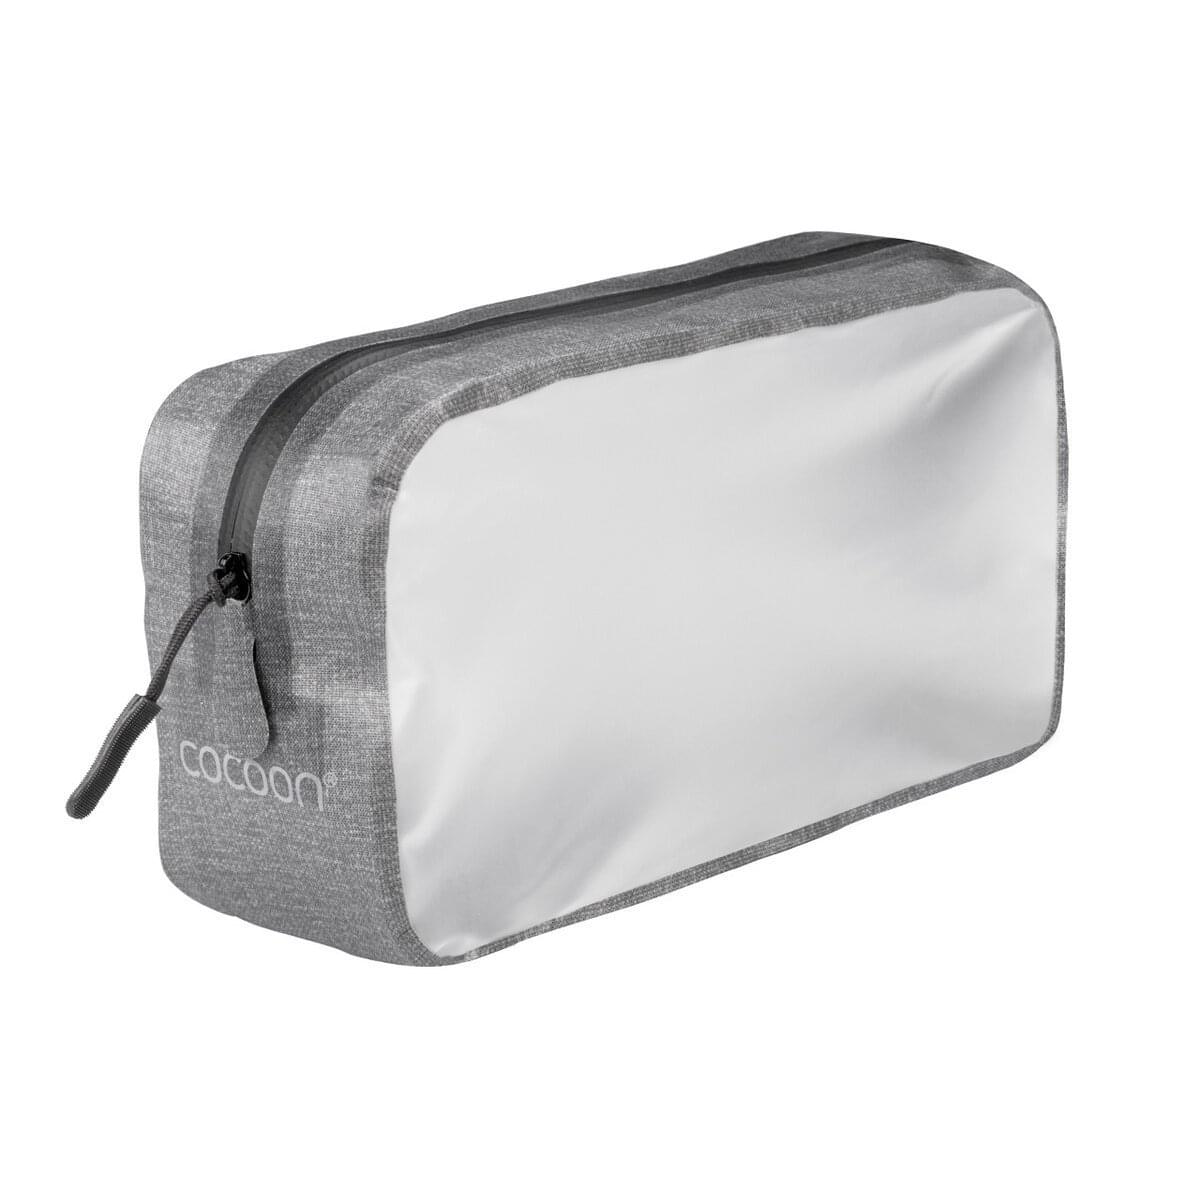 Carry On Liquids Bags - Heather grey